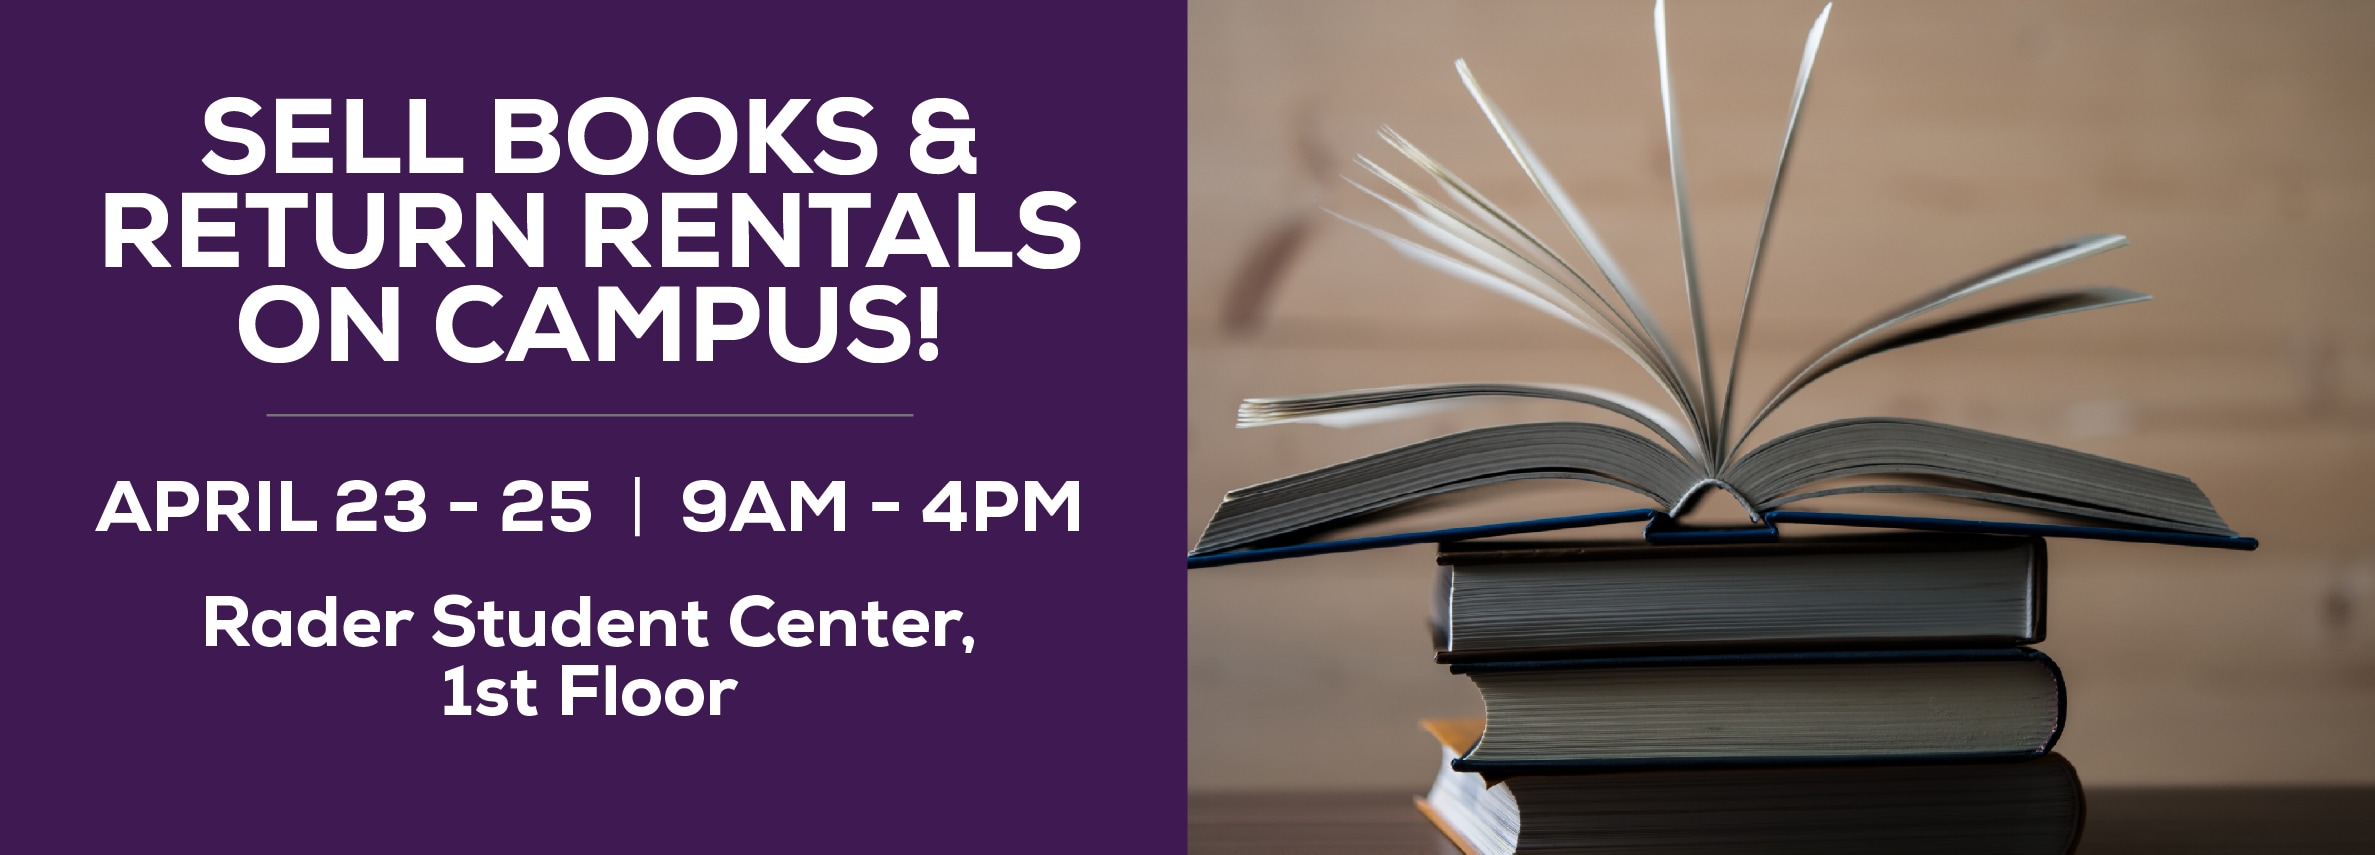 Sell books and return rentals on campus! April 23 - 25. 9AM TO 4PM. Rader Student Center, 1st Floor.